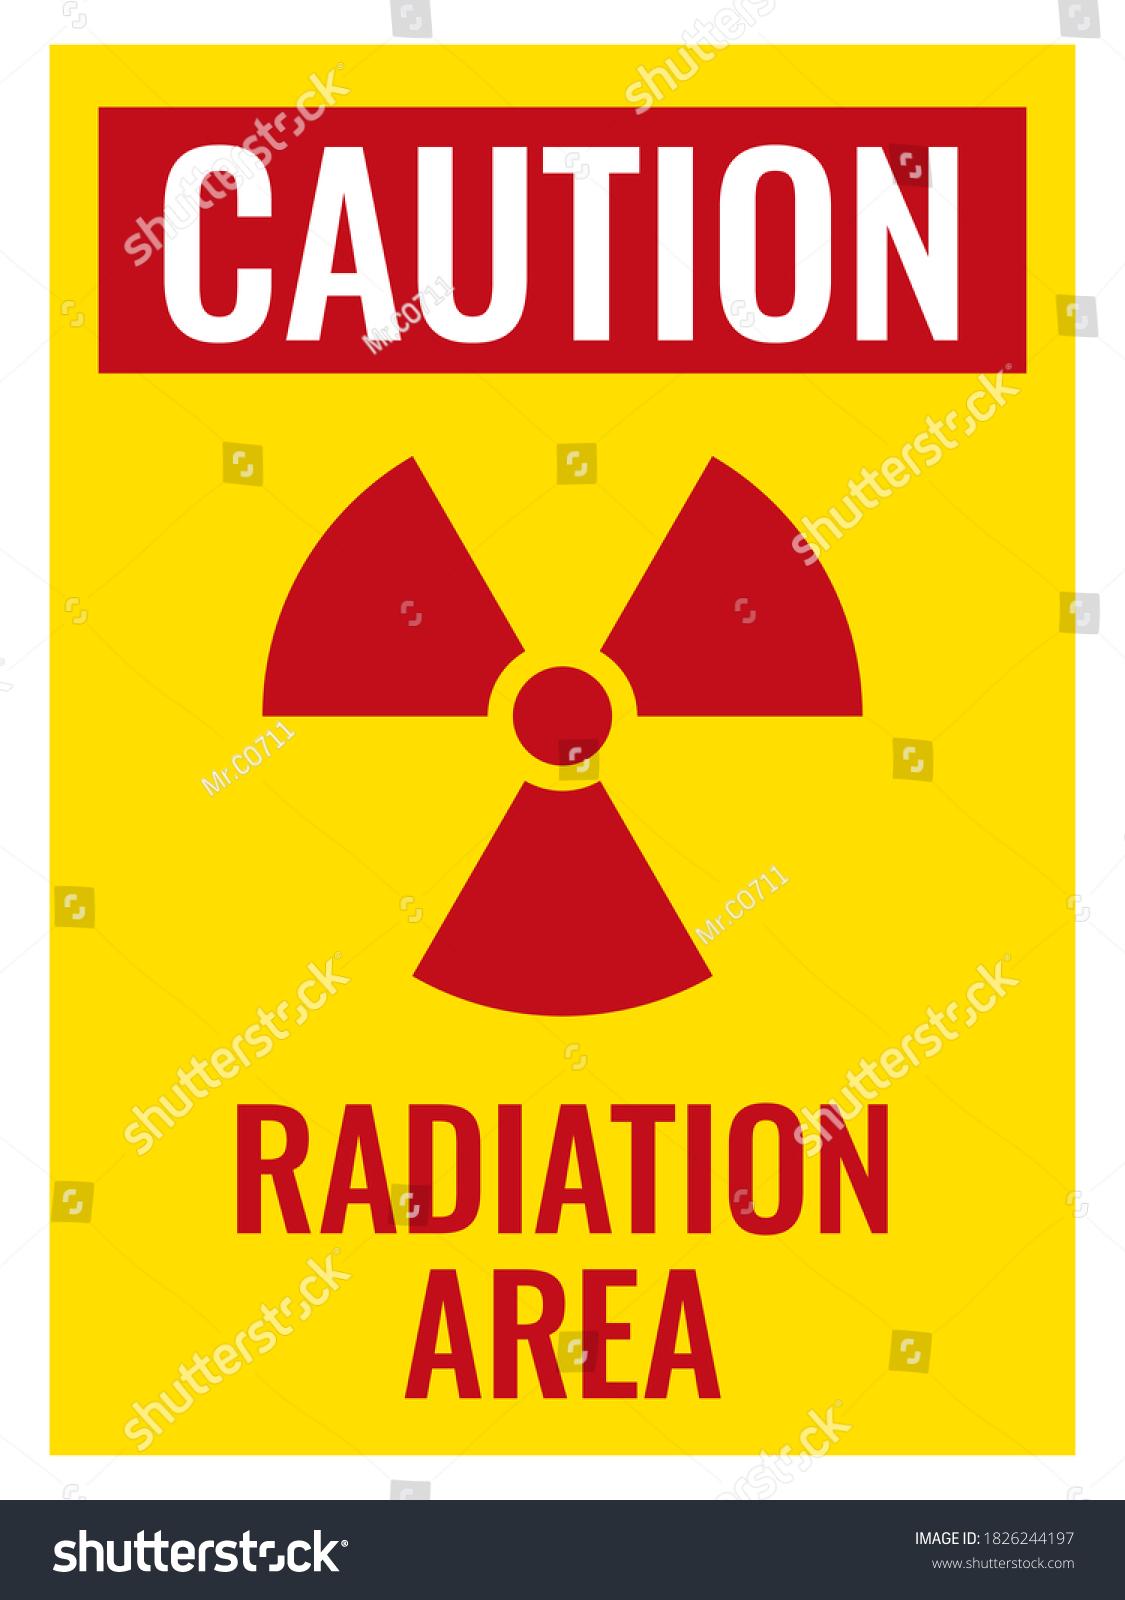 Safety Signs Danger Caution Warning Custom Stock Vector (Royalty Free ...